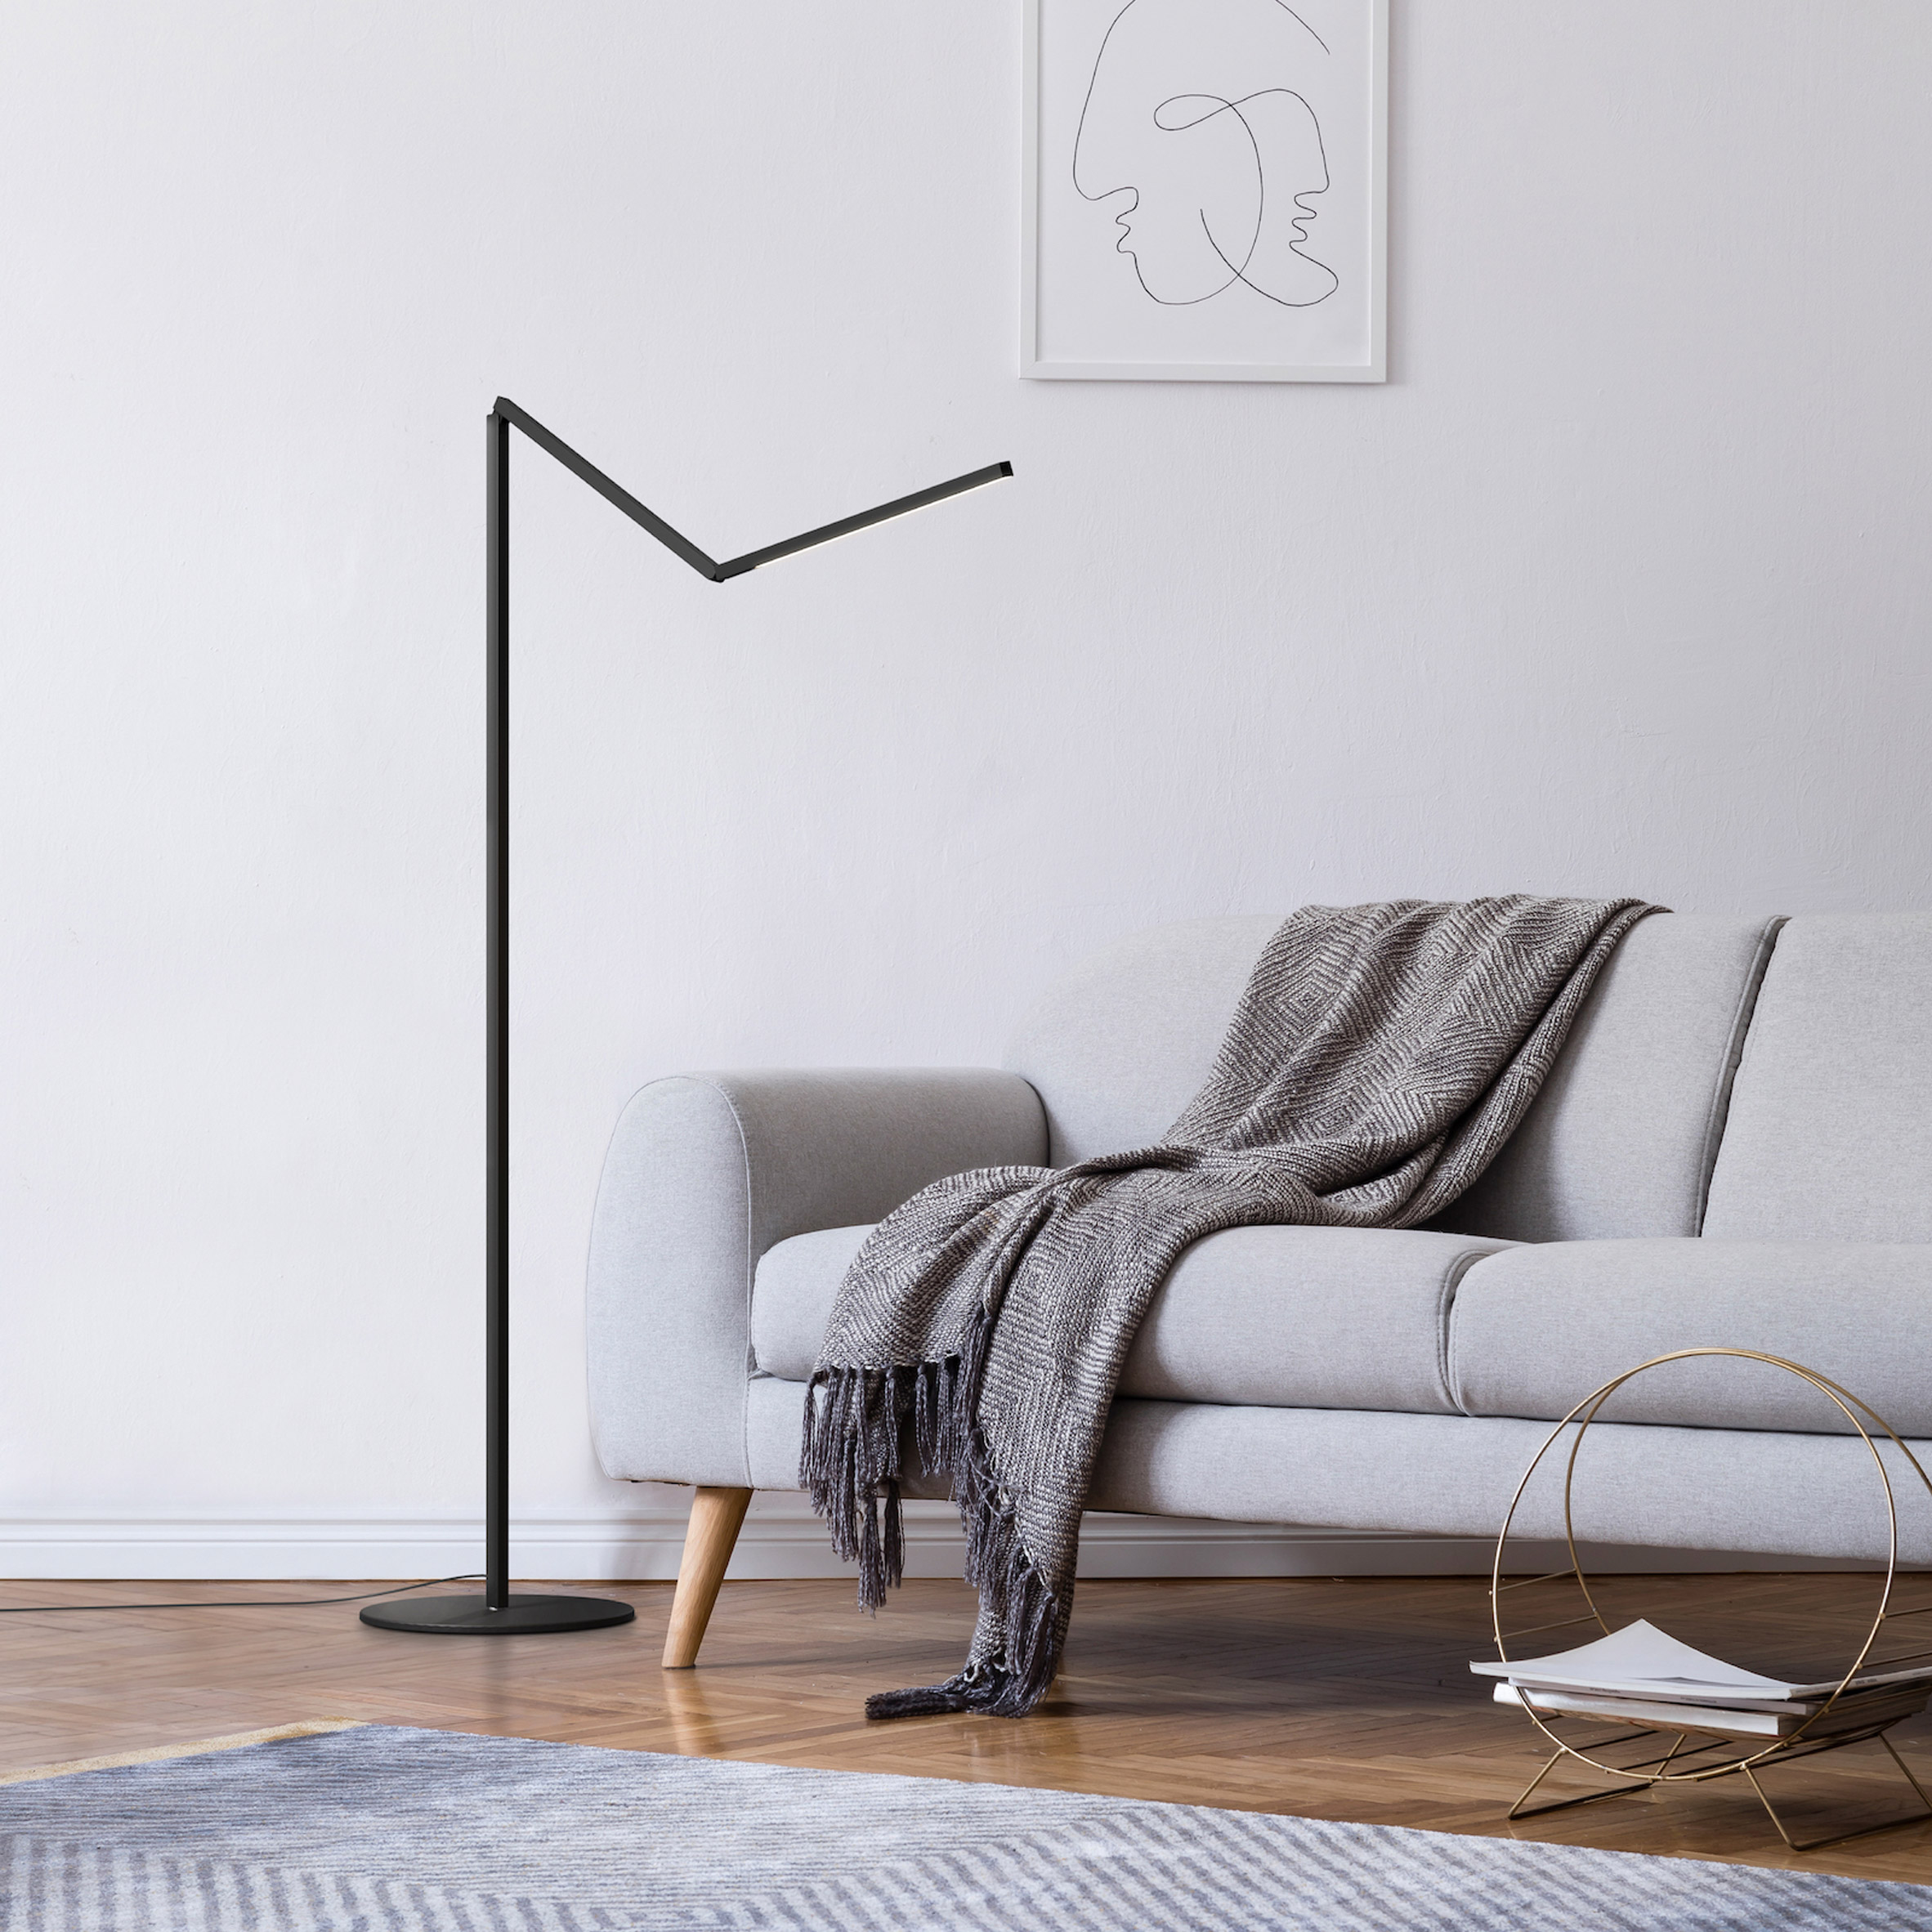 A photograph of the Z-Bar Gen 4 lamp in a living room